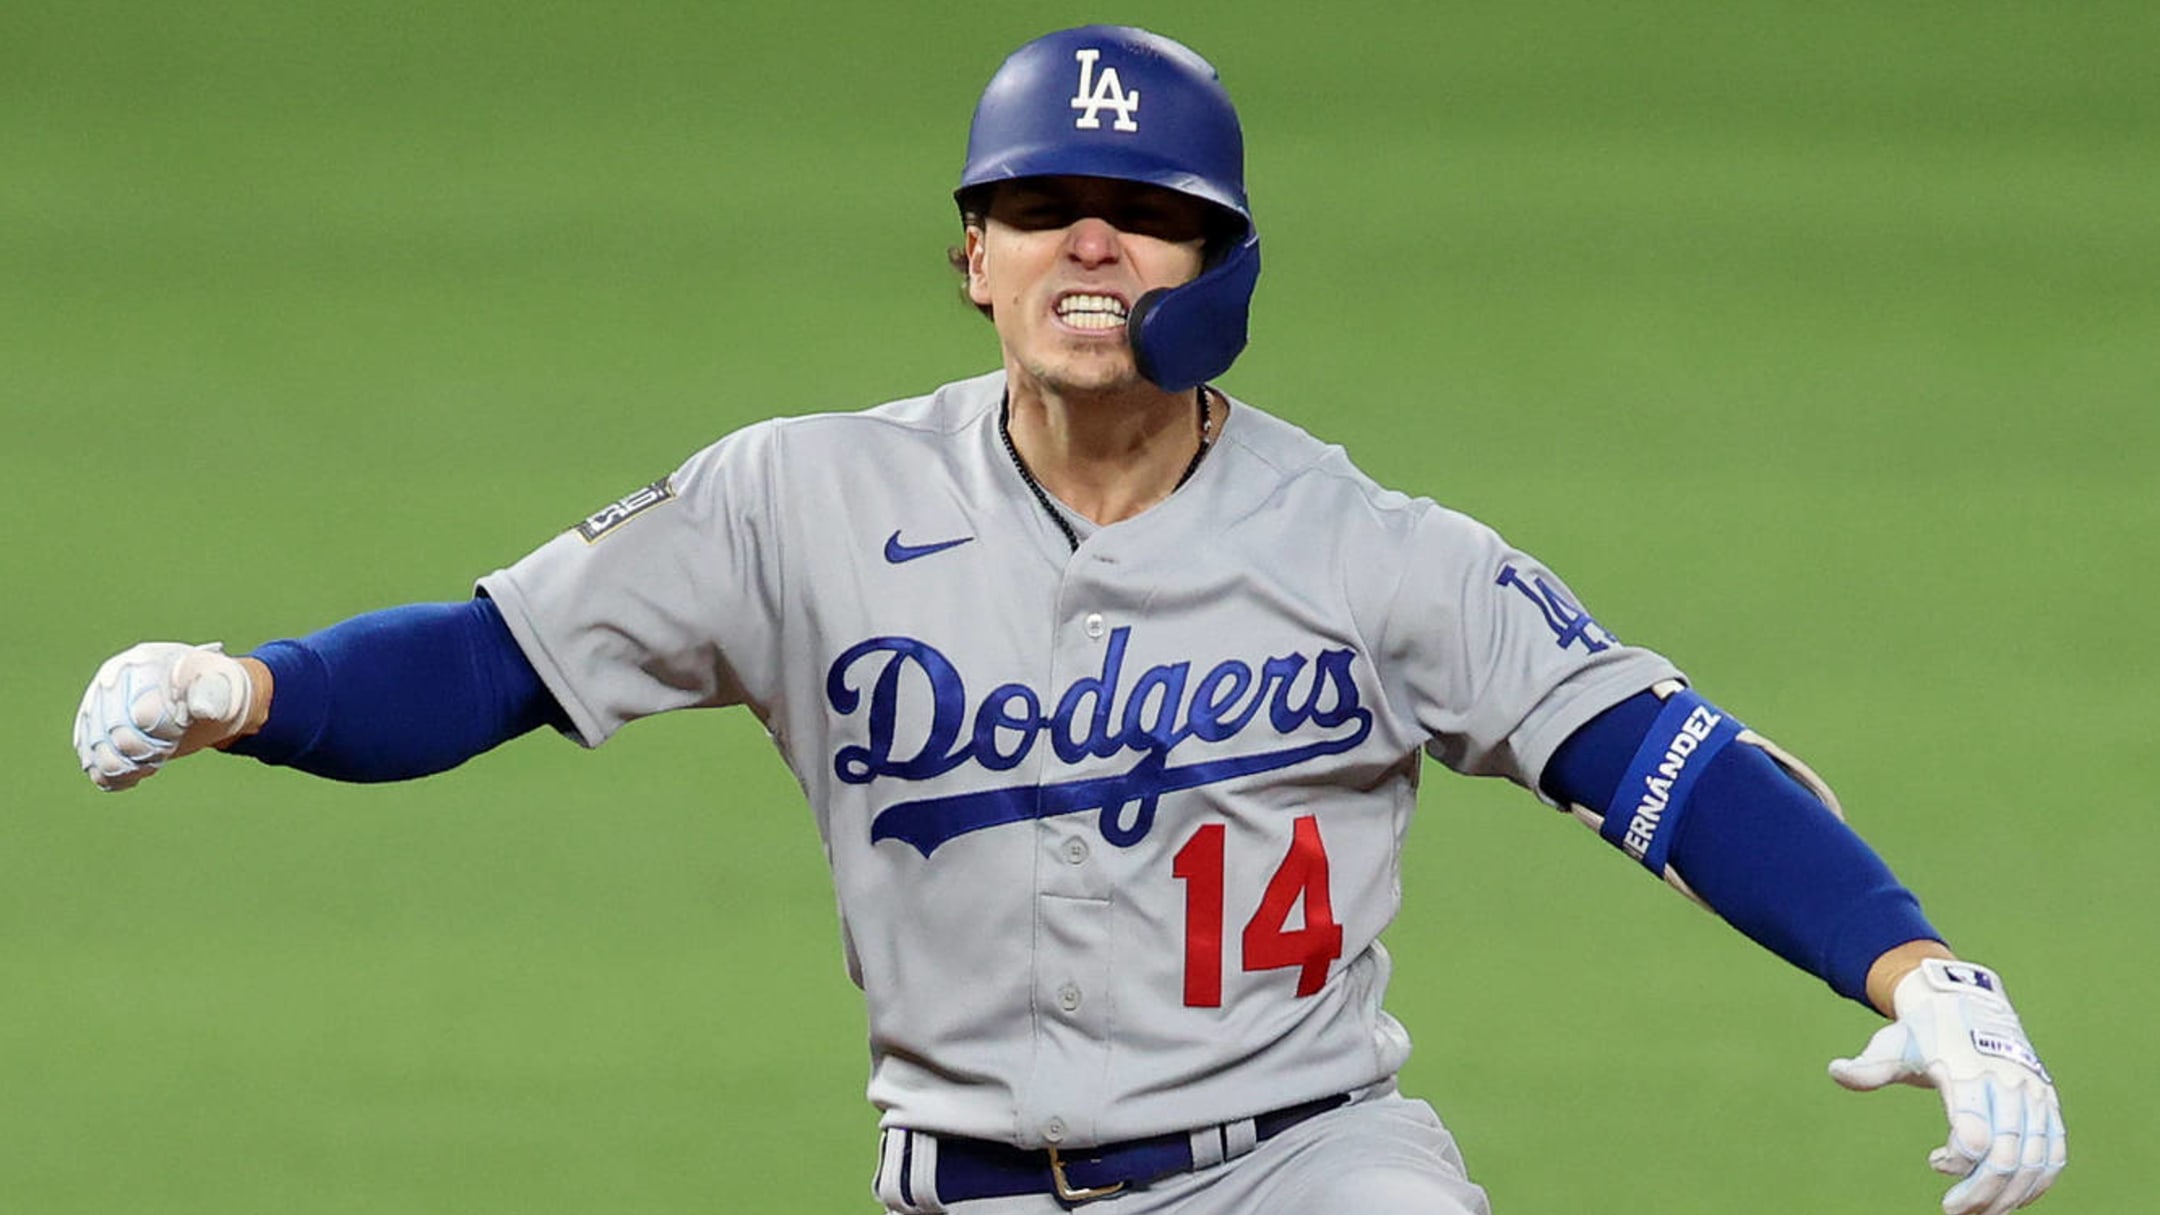 Red Sox sign Enrique Hernández to two-year deal, per report - MLB Daily Dish